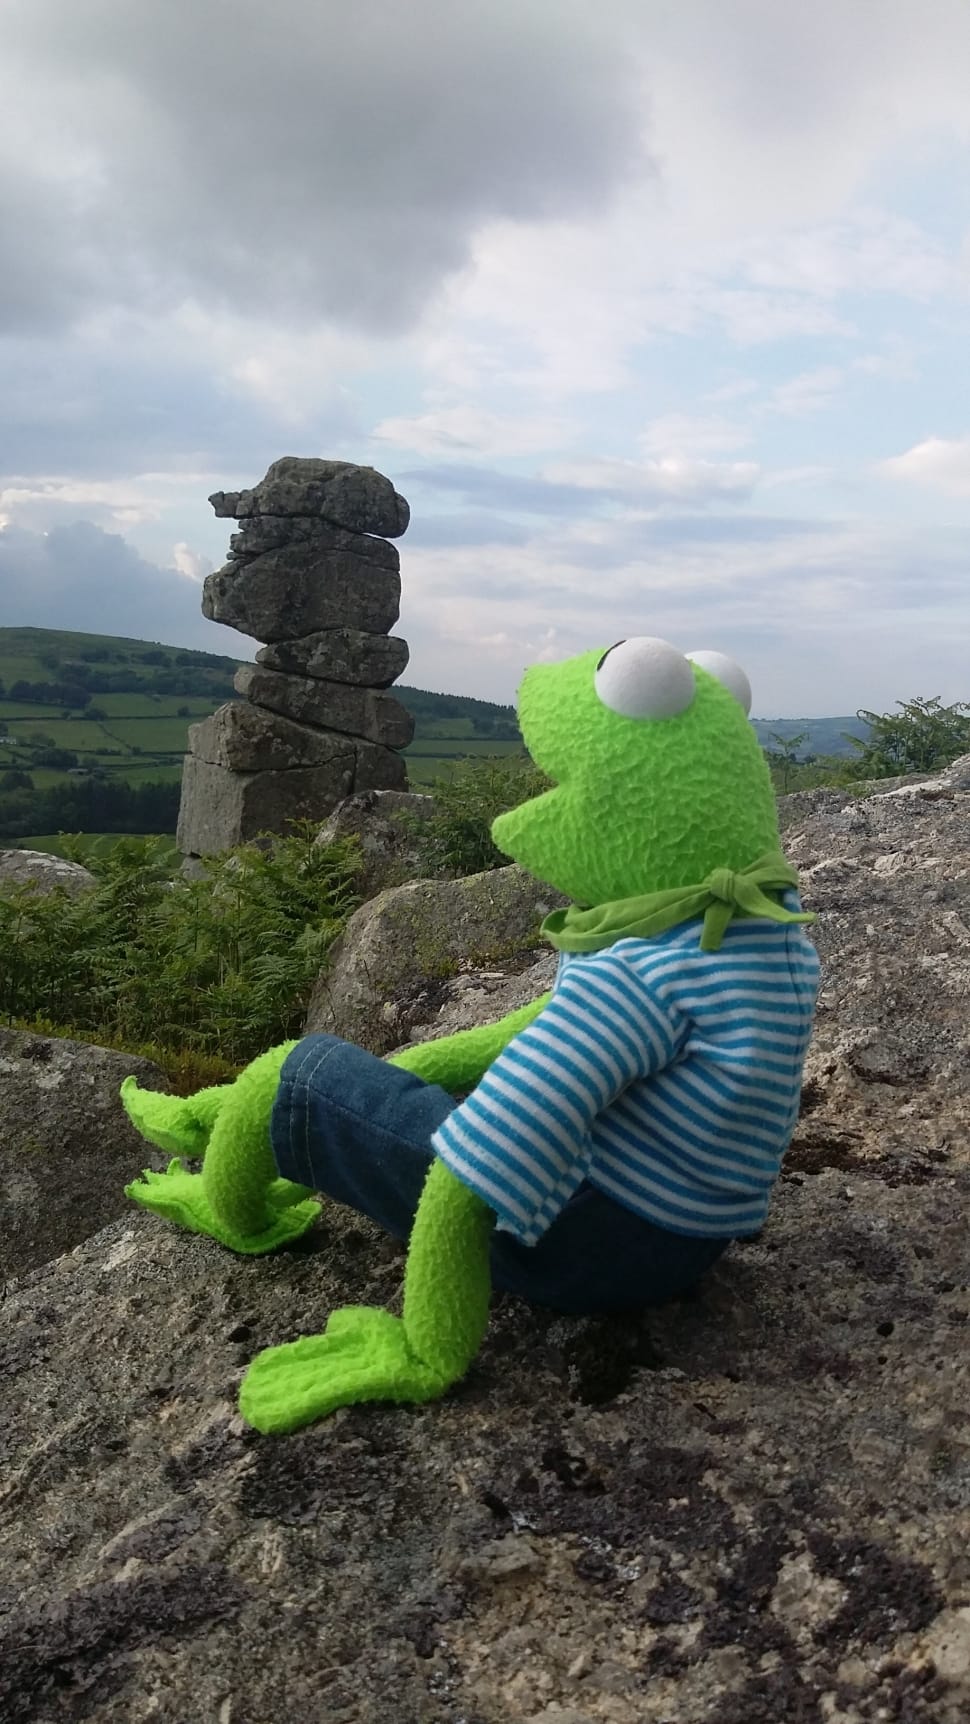 kermet the frog plush toy on ground and rock pile at distance under nimbus clouds preview